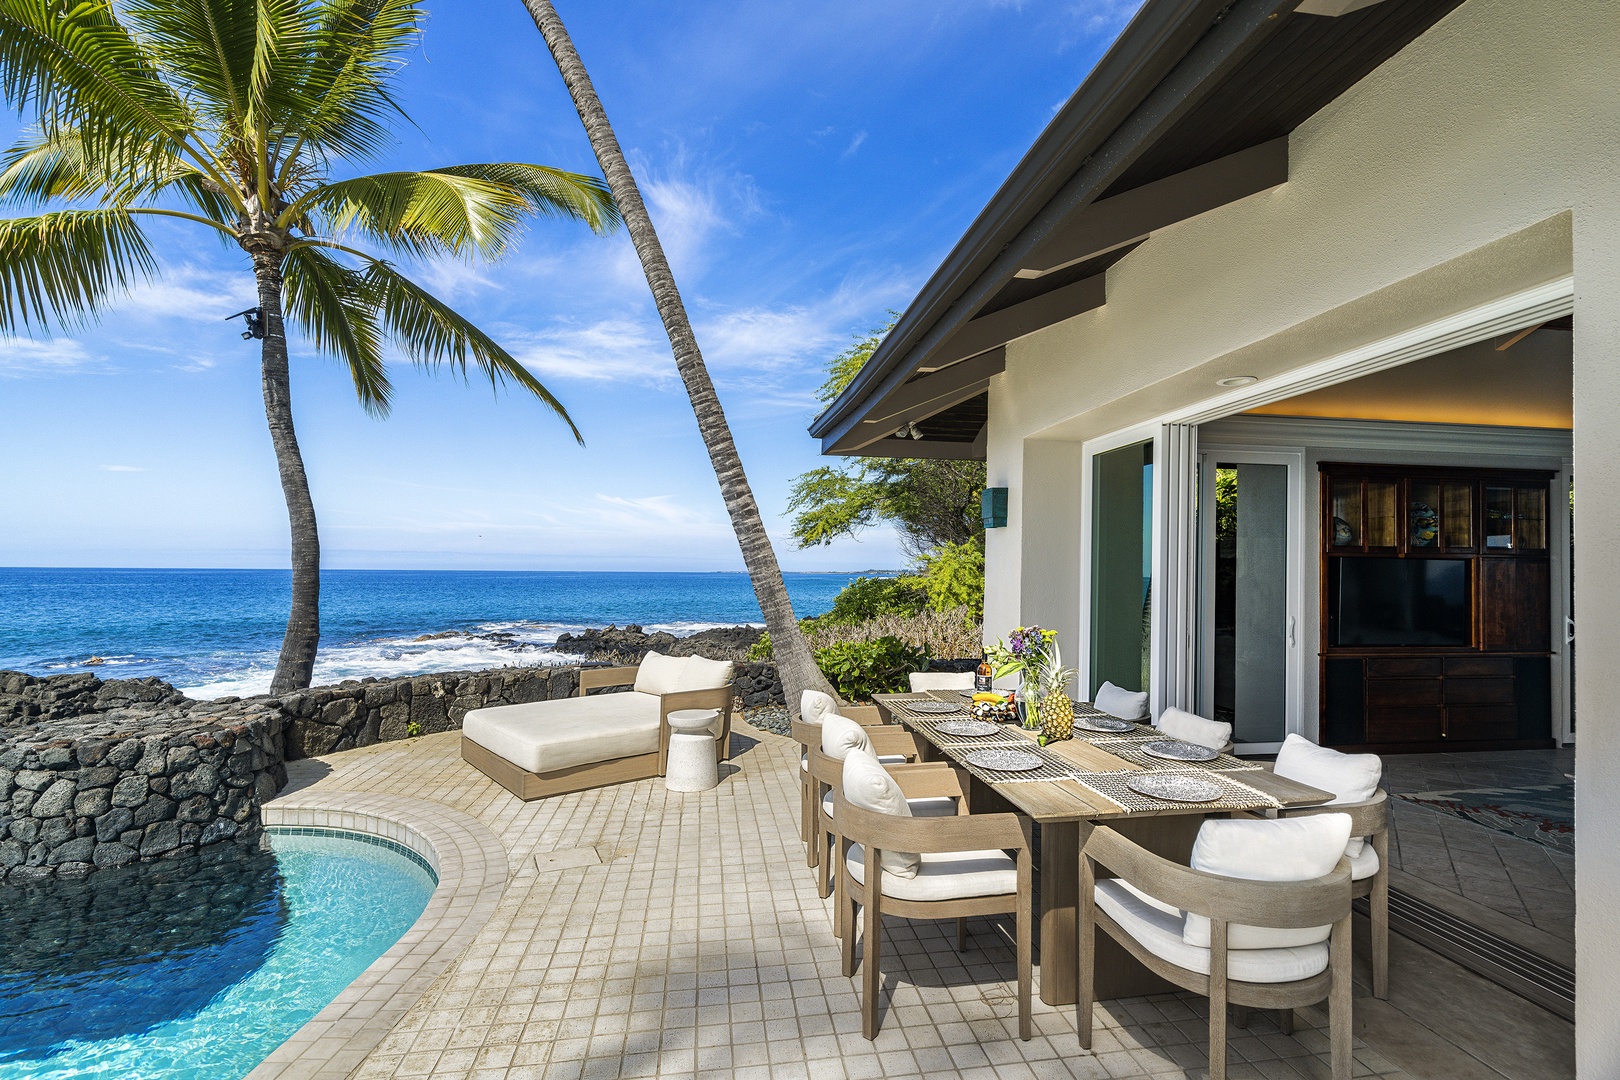 Kailua Kona Vacation Rentals, Ali'i Point #9 - Take in all that Ali'i Point #9 has to offer!